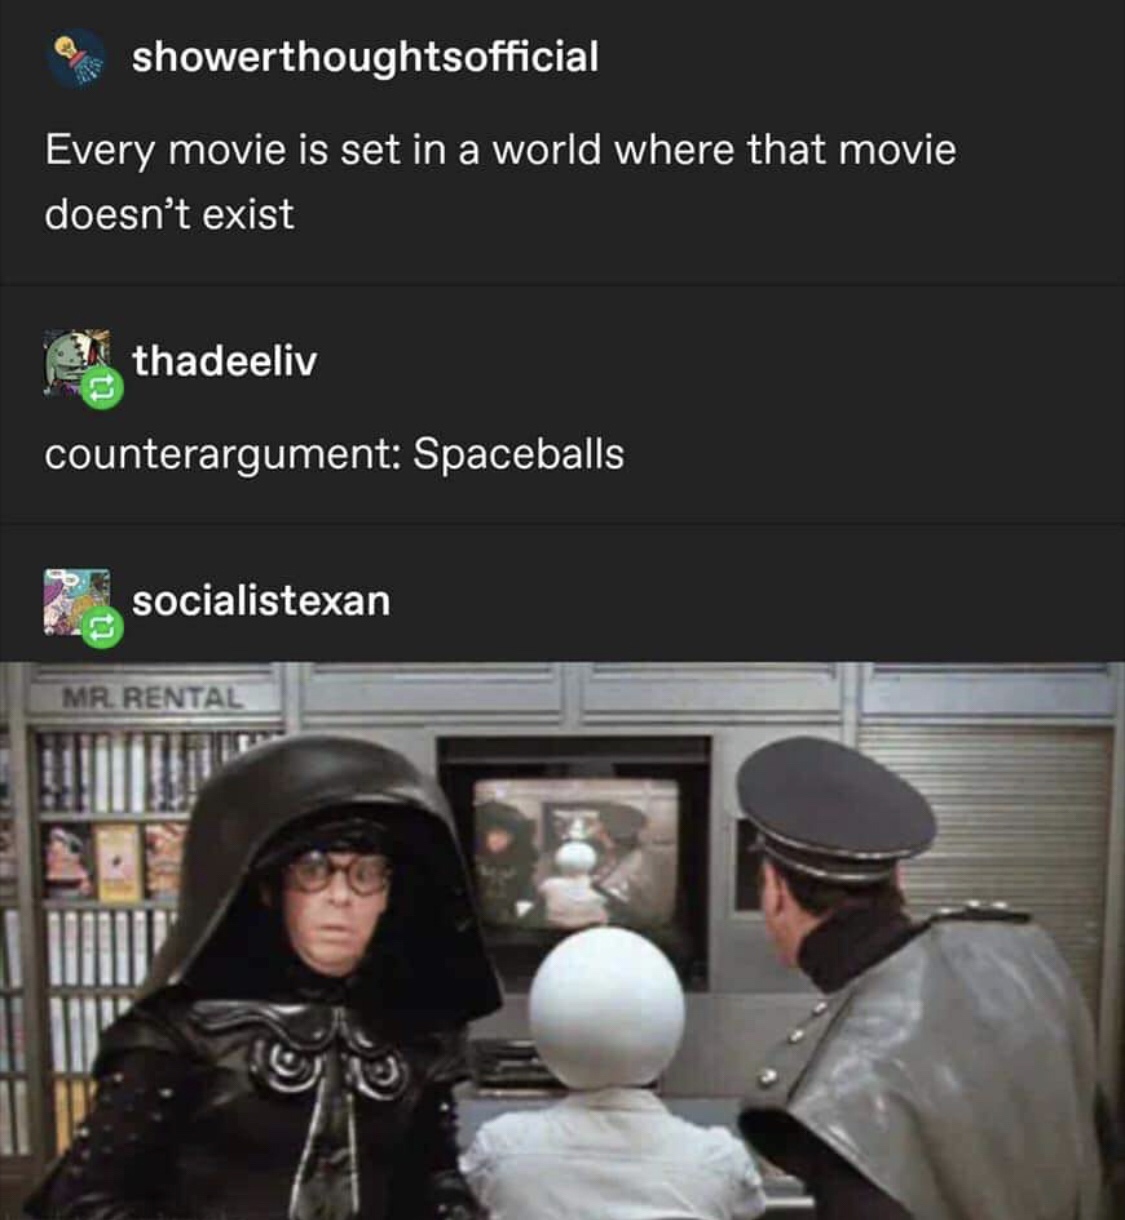 spaceballs the movie - @ showerthoughtsofficial Every movie is set in a world where that movie doesn't exist thadeeliv counterargument Spaceballs socialistexan Mr. Rental